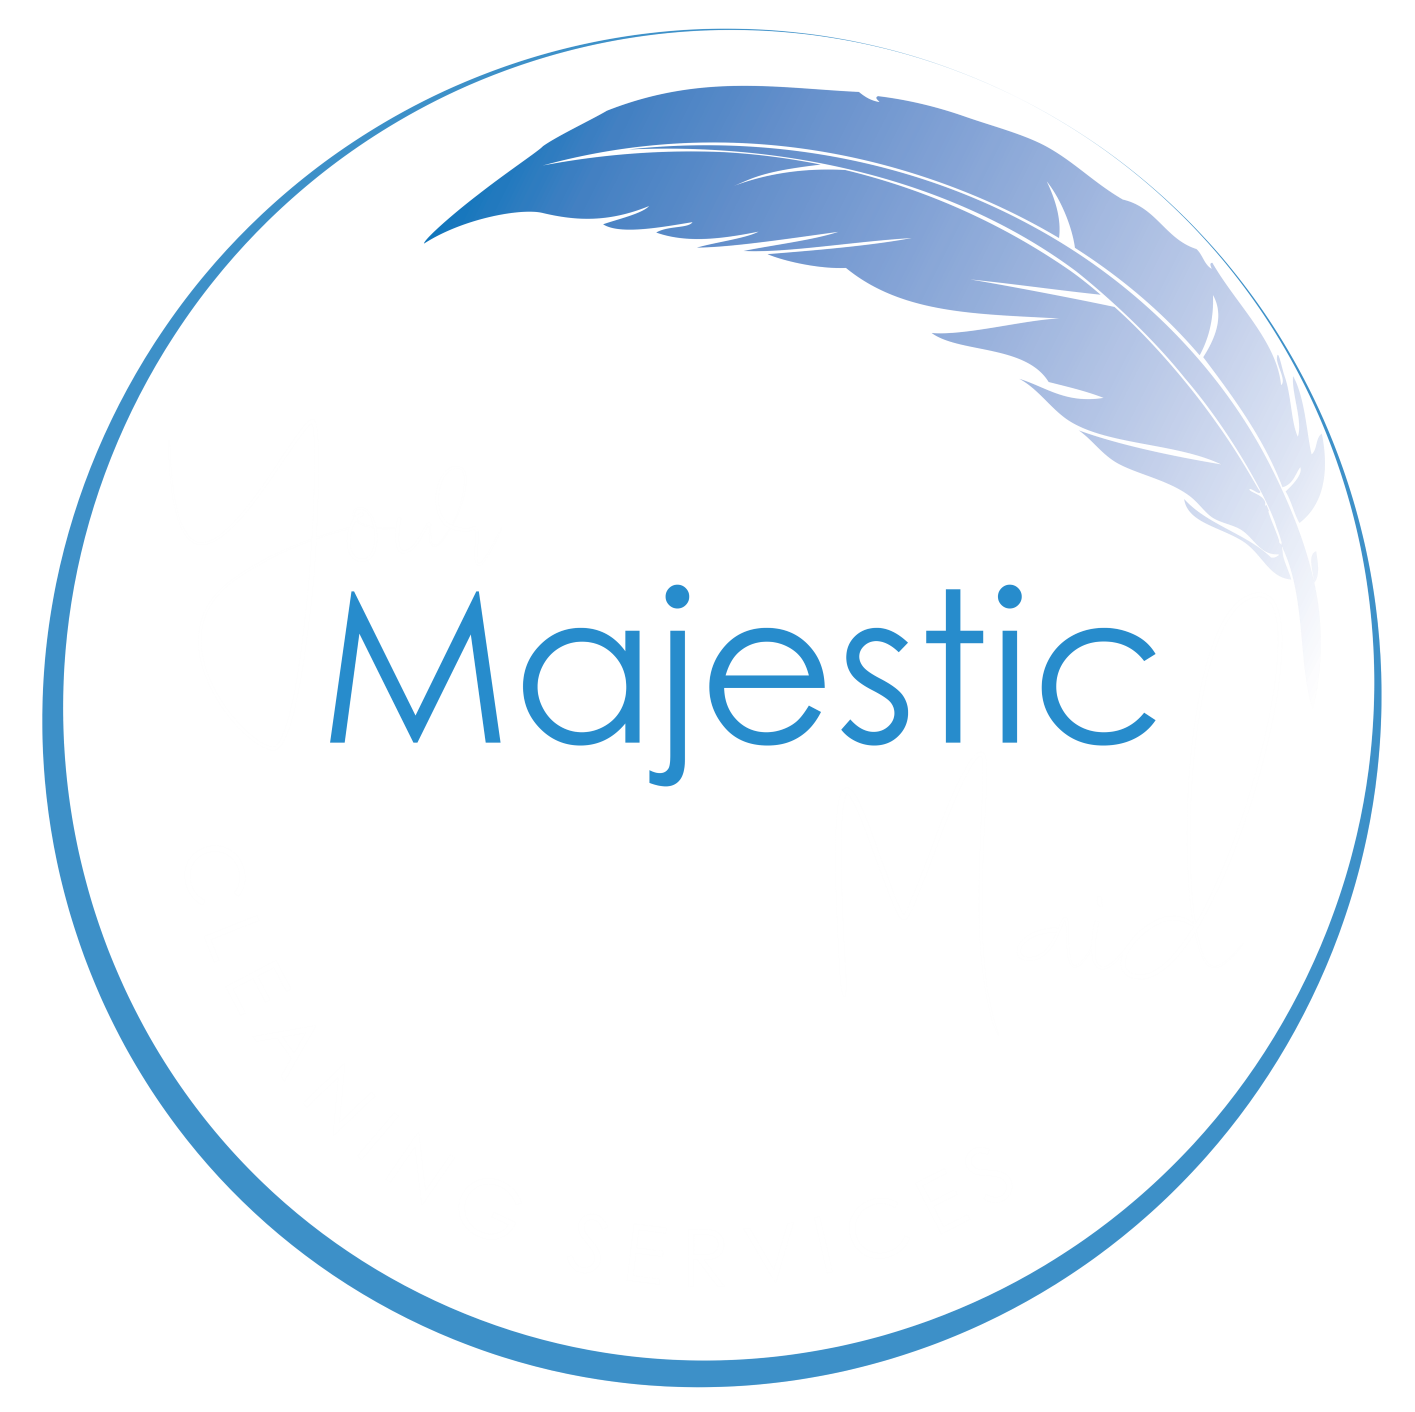 Your Majestic Maid